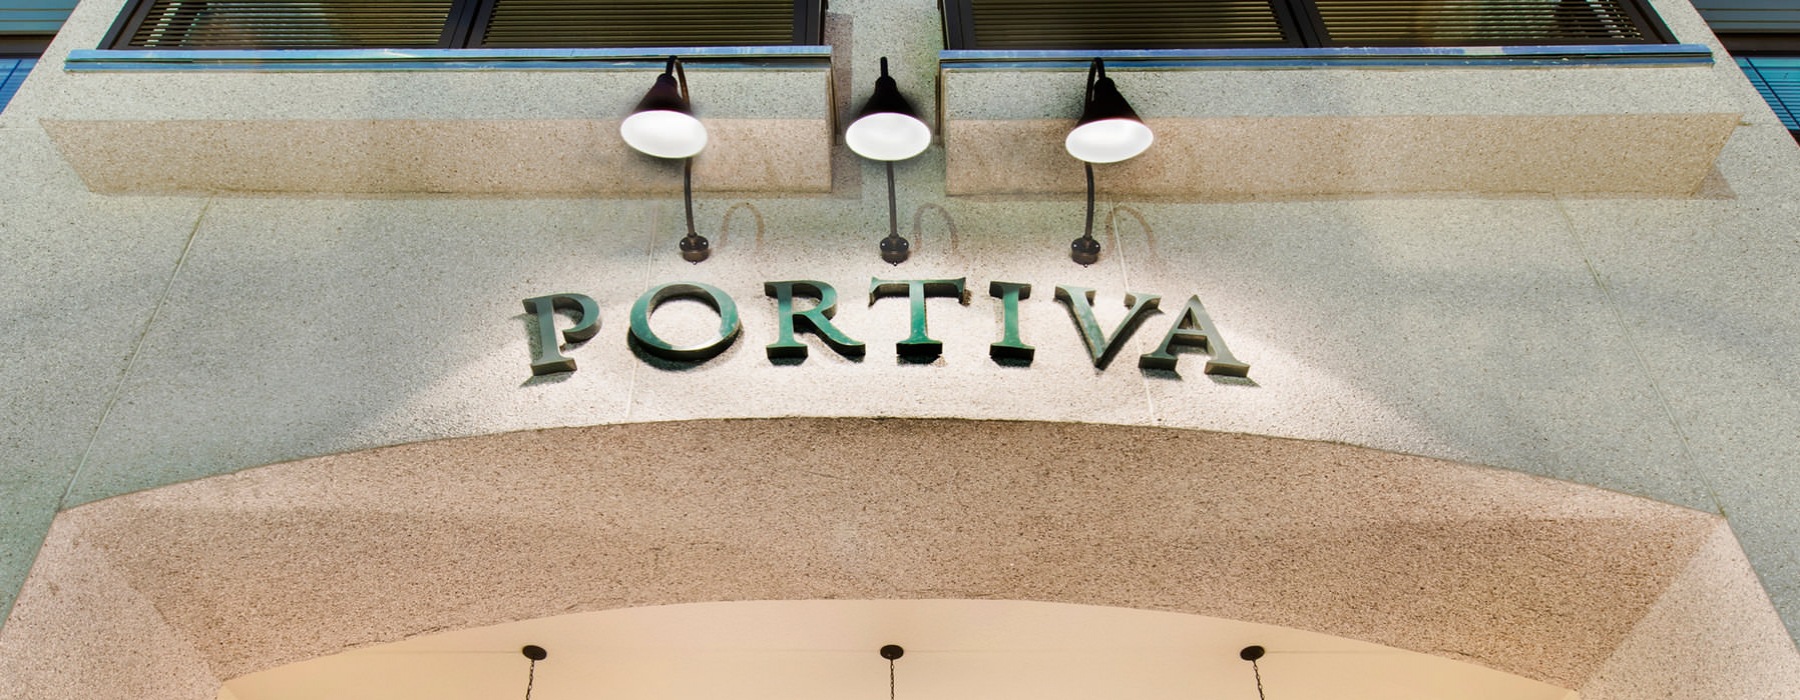 Portiva signage over entryway